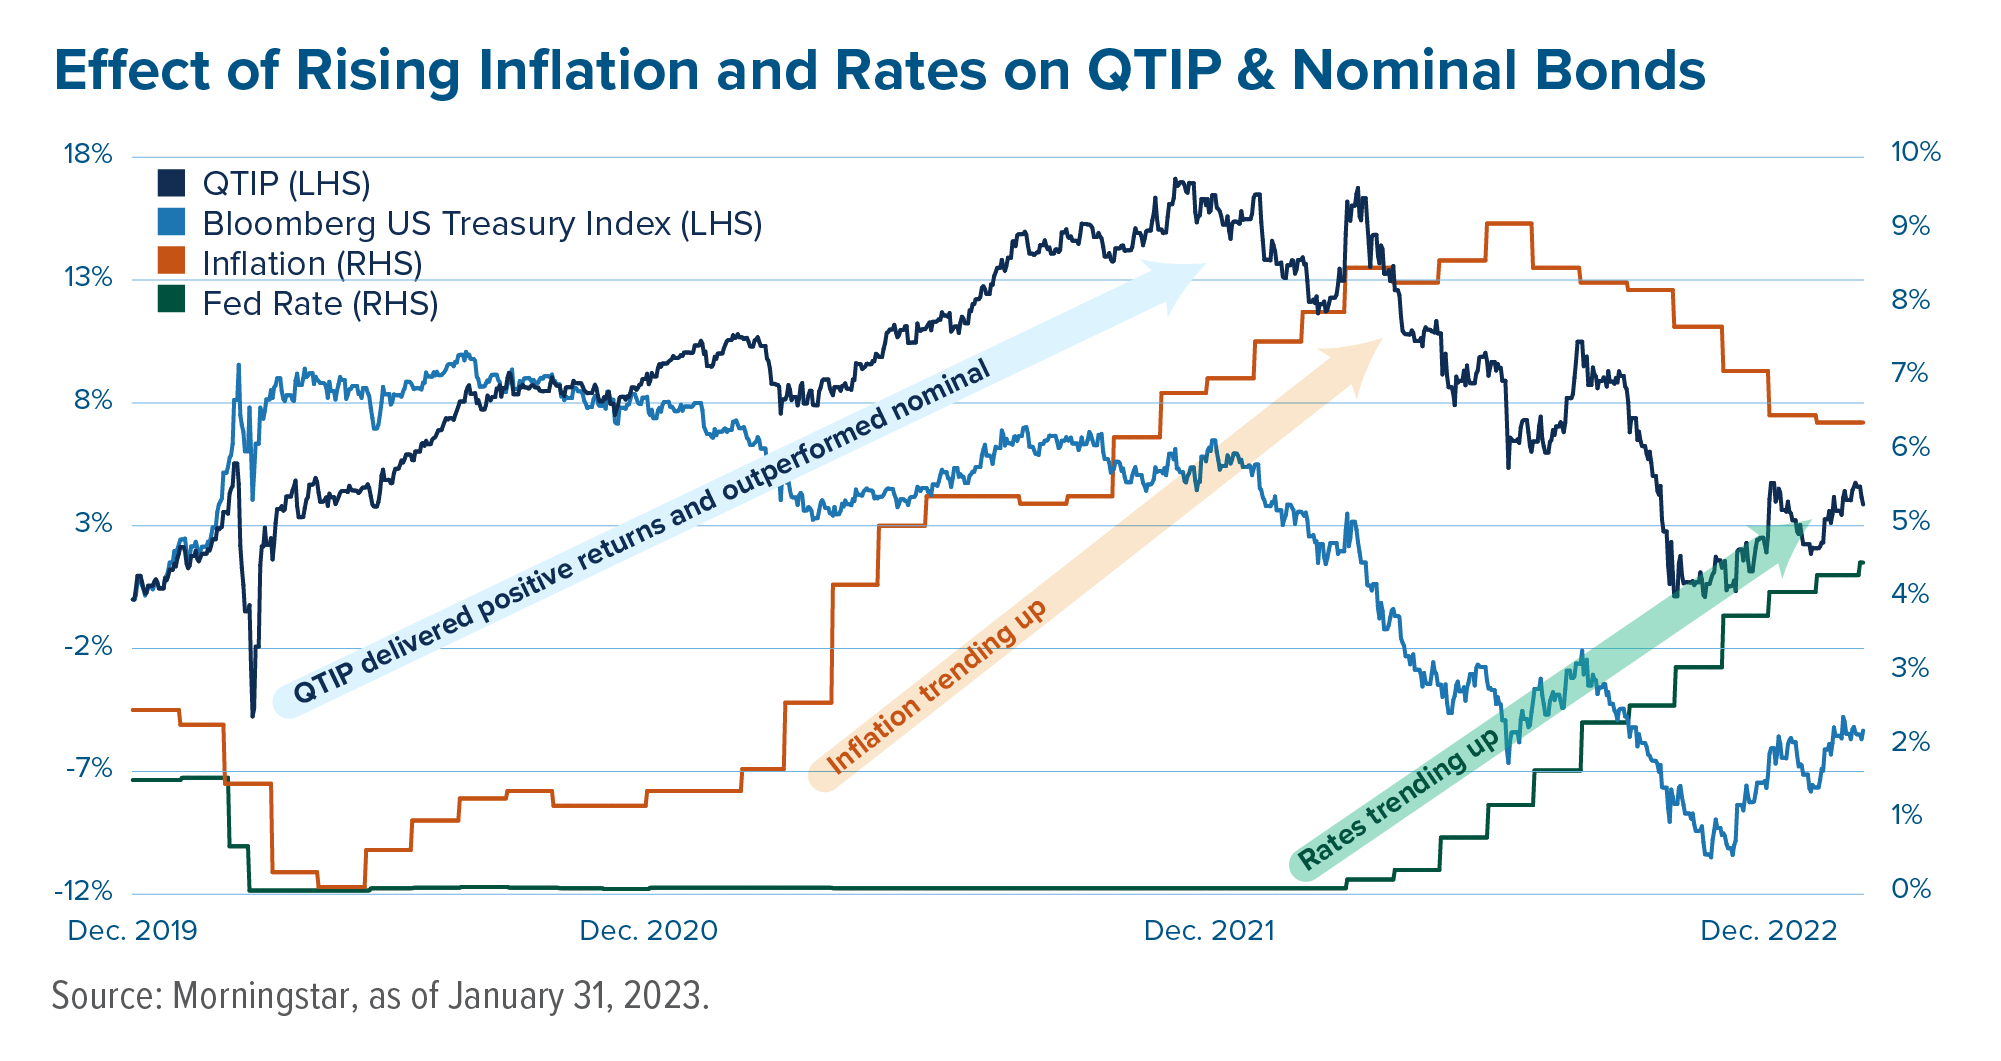 Effect of rising inflation and rates on QTIP & nominal bonds.